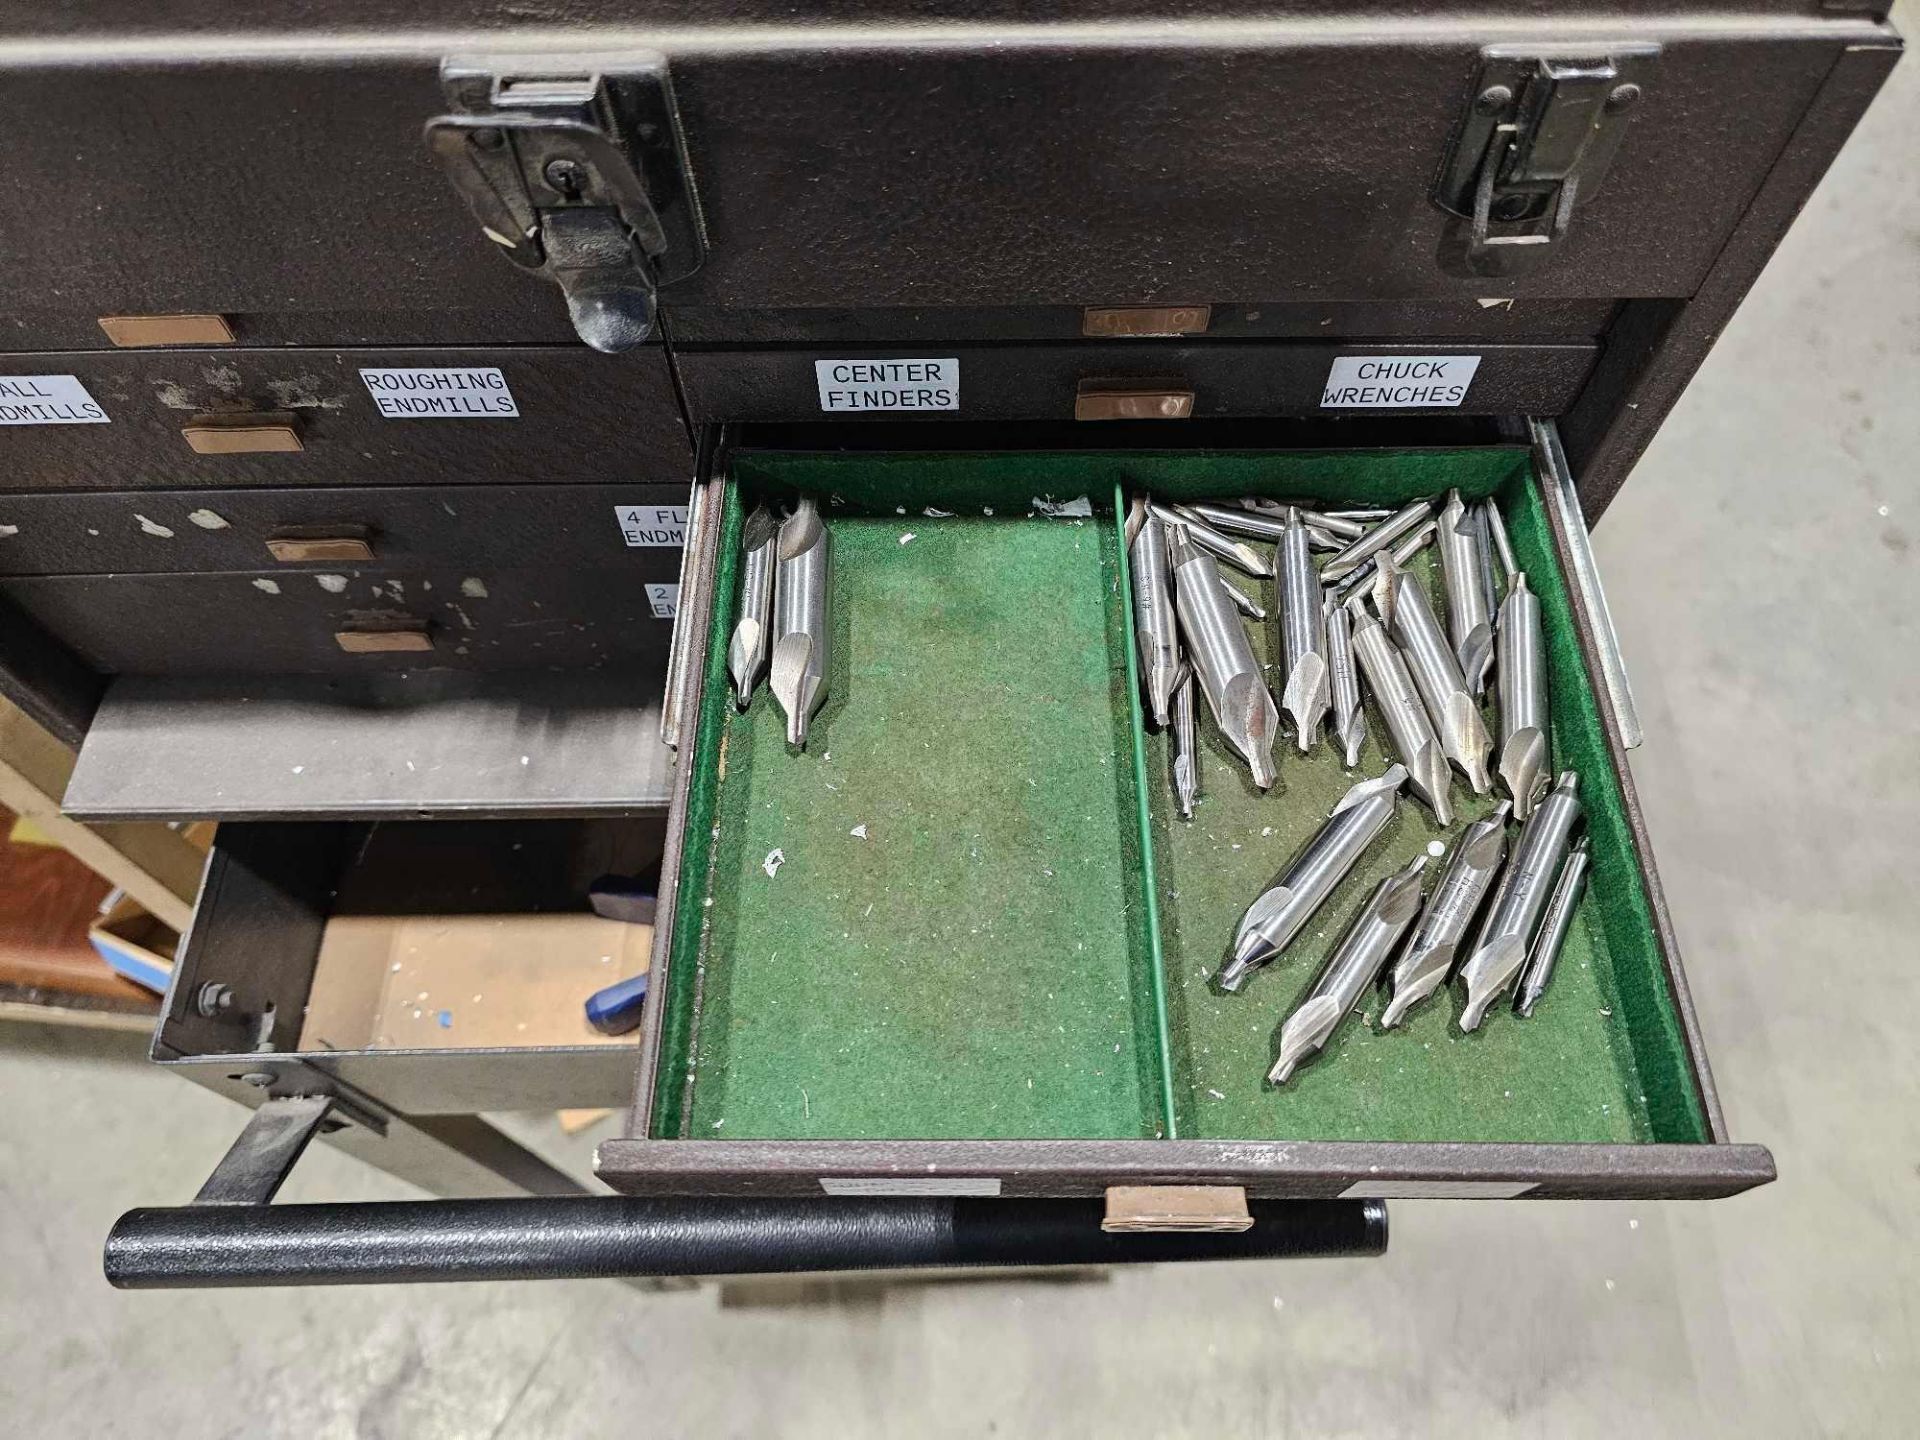 KENNEDY TOOL BOXES LOADED WITH MACHINISTS TOOLS AND MEASURING DEVICES - Image 33 of 45